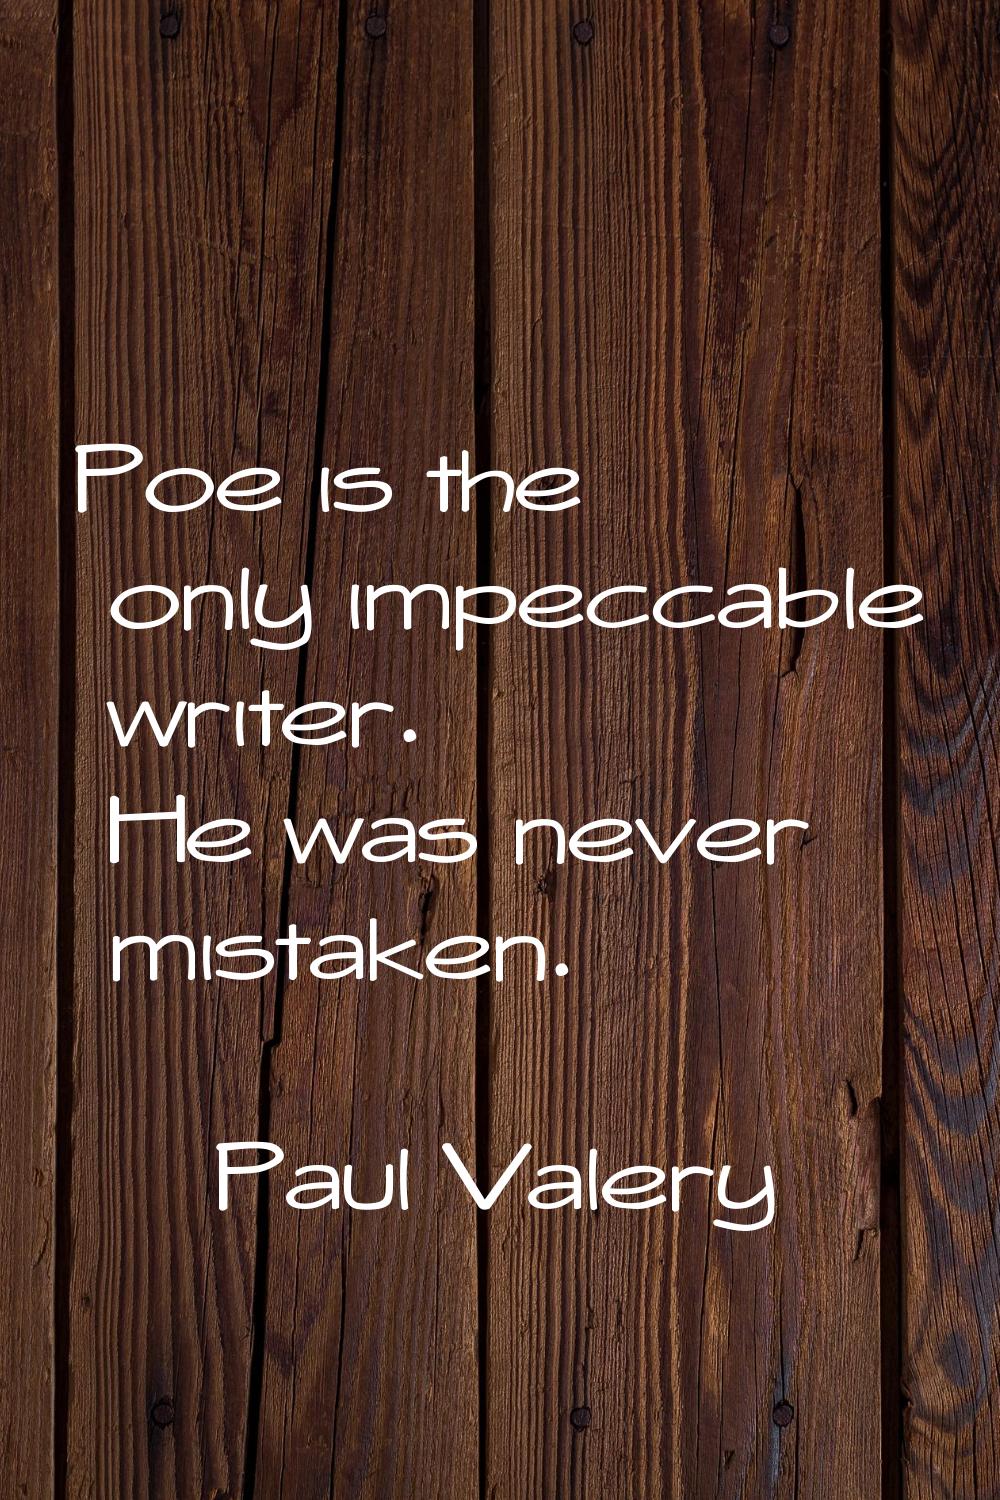 Poe is the only impeccable writer. He was never mistaken.